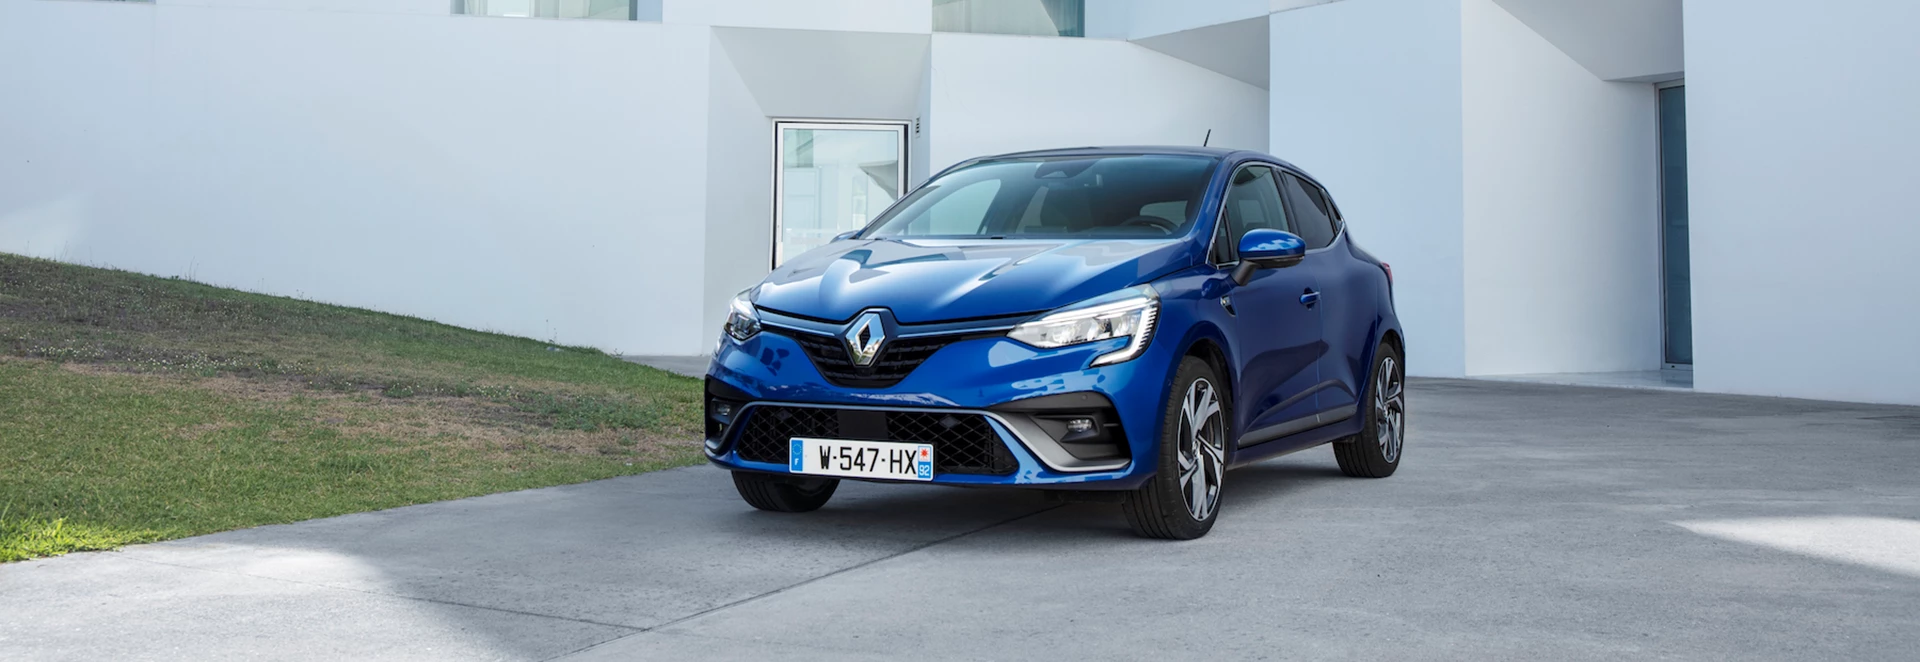 Prices and specs announced for all-new Renault Clio 